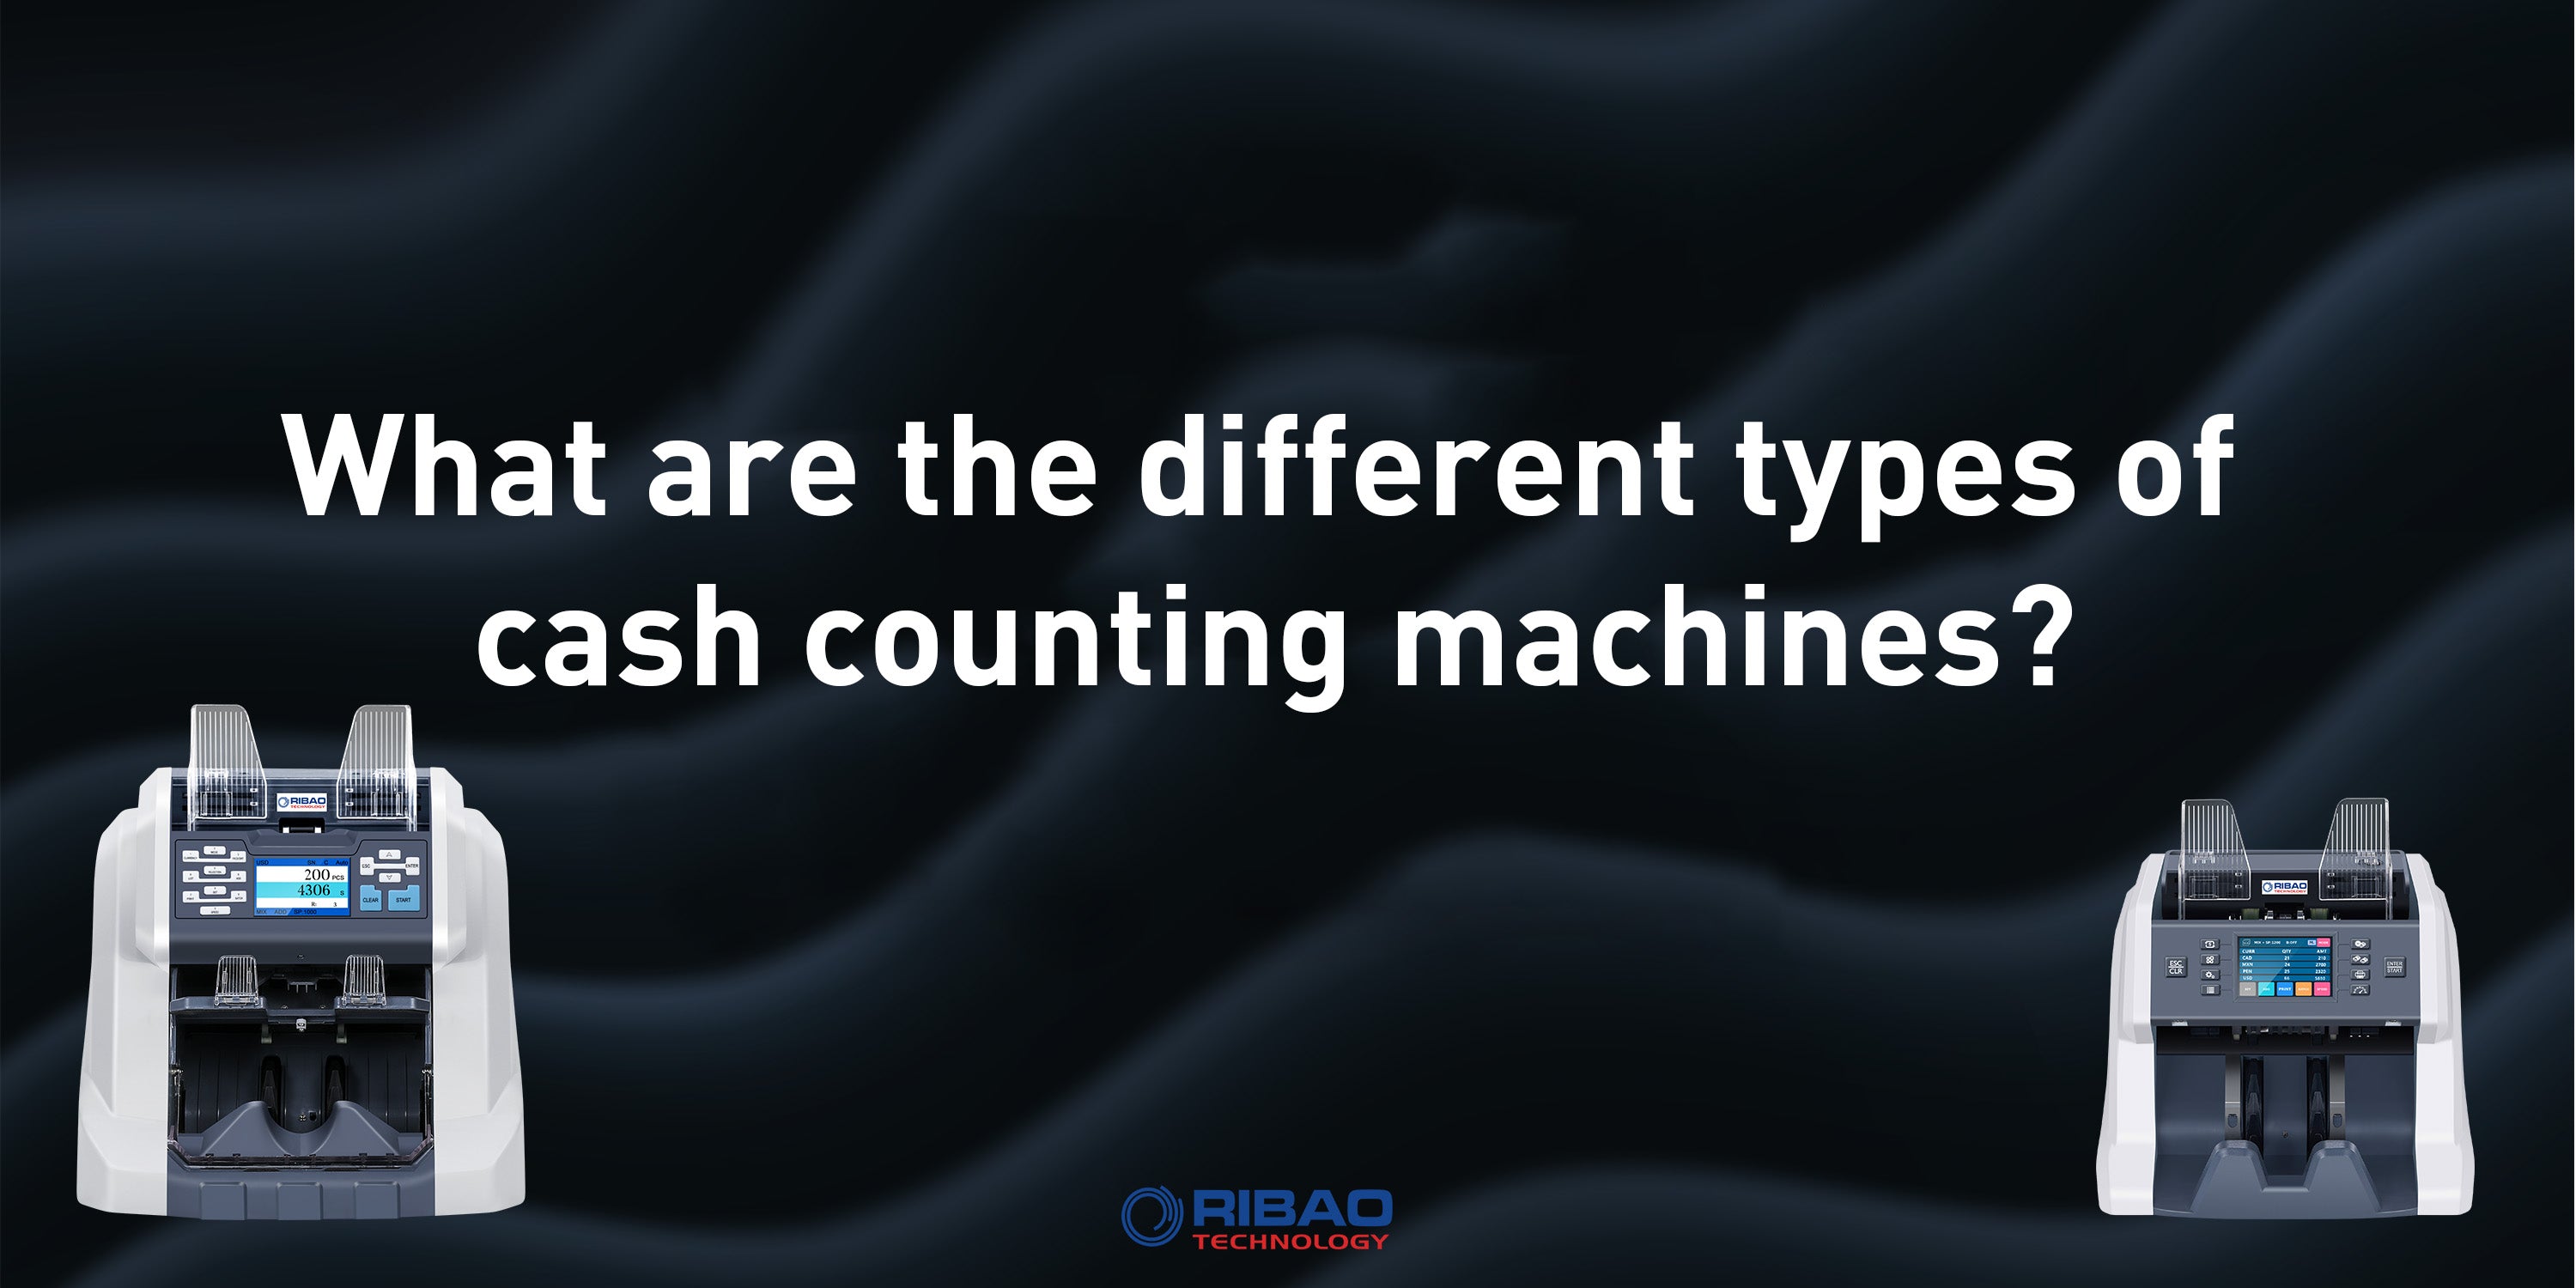 What are the different types of cash counting machines